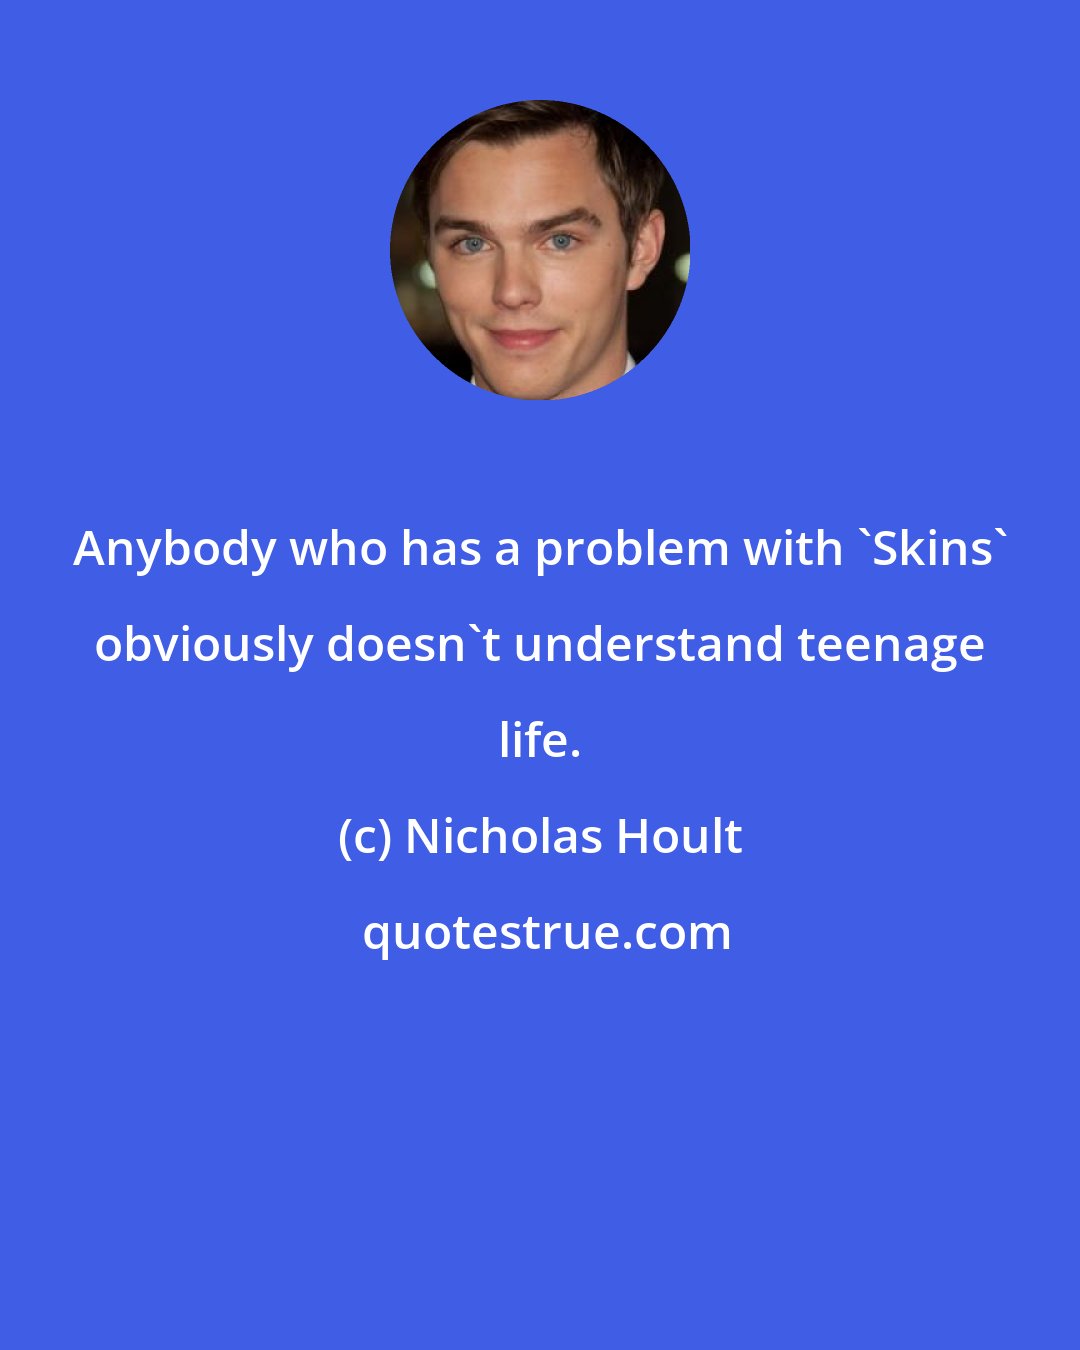 Nicholas Hoult: Anybody who has a problem with 'Skins' obviously doesn't understand teenage life.